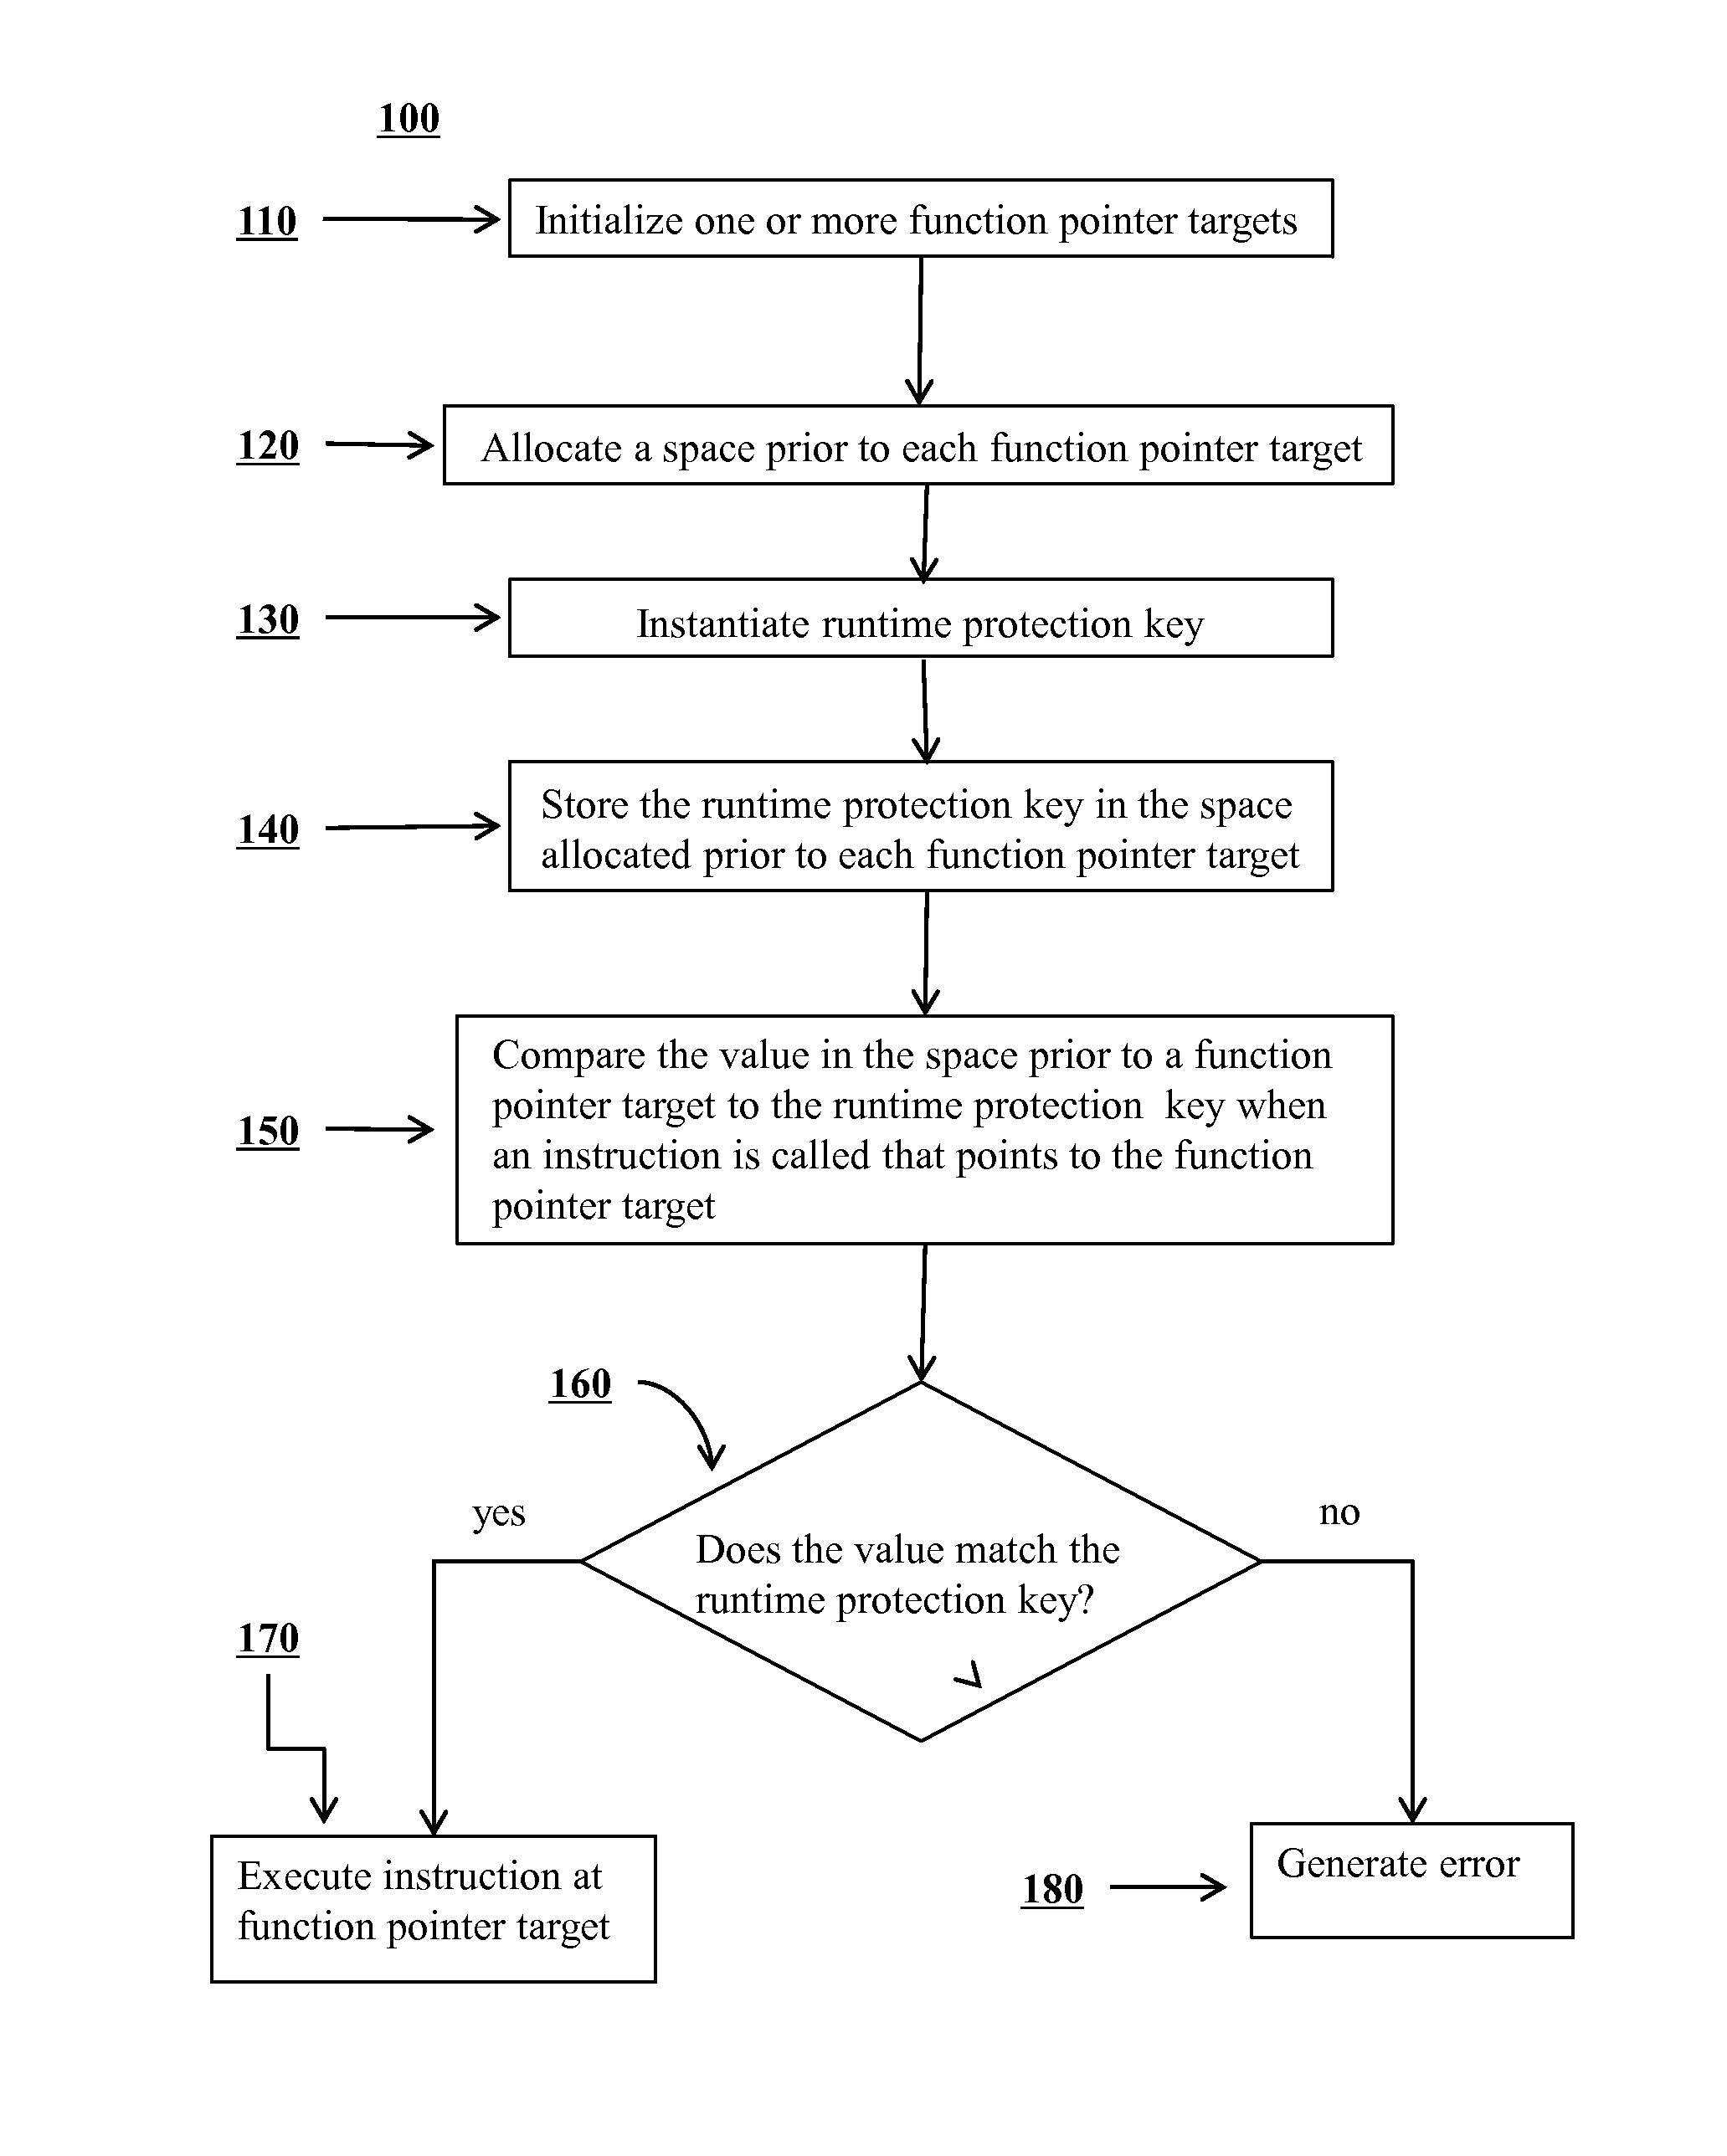 Mitigation of function pointer overwrite attacks